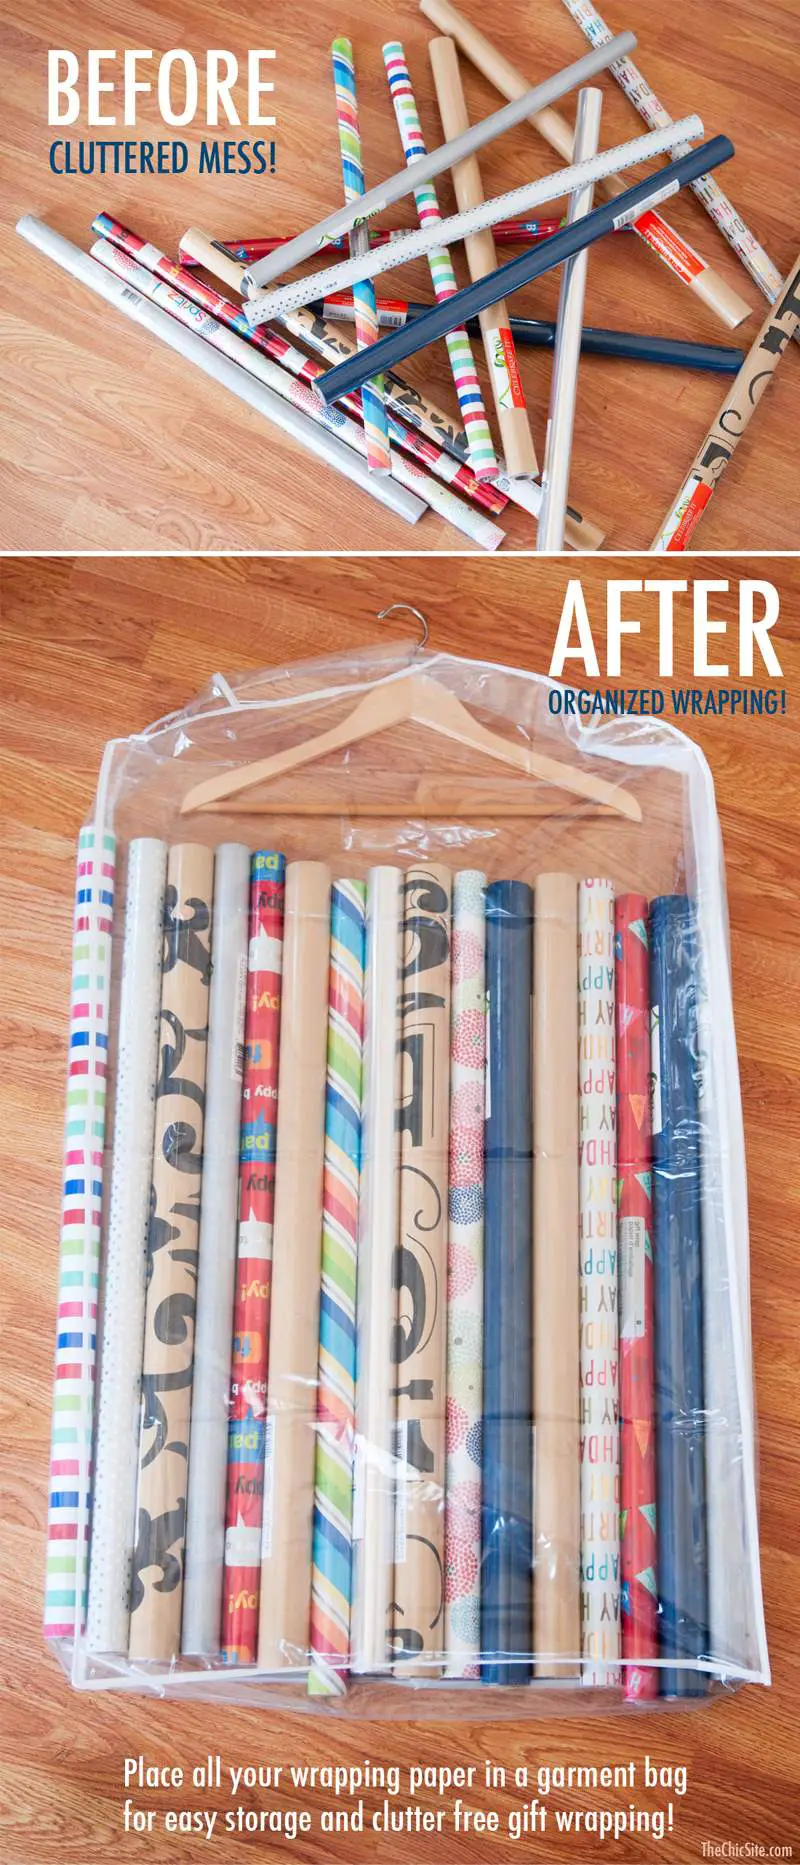 Wrapping Paper Storage, Small space living hacks